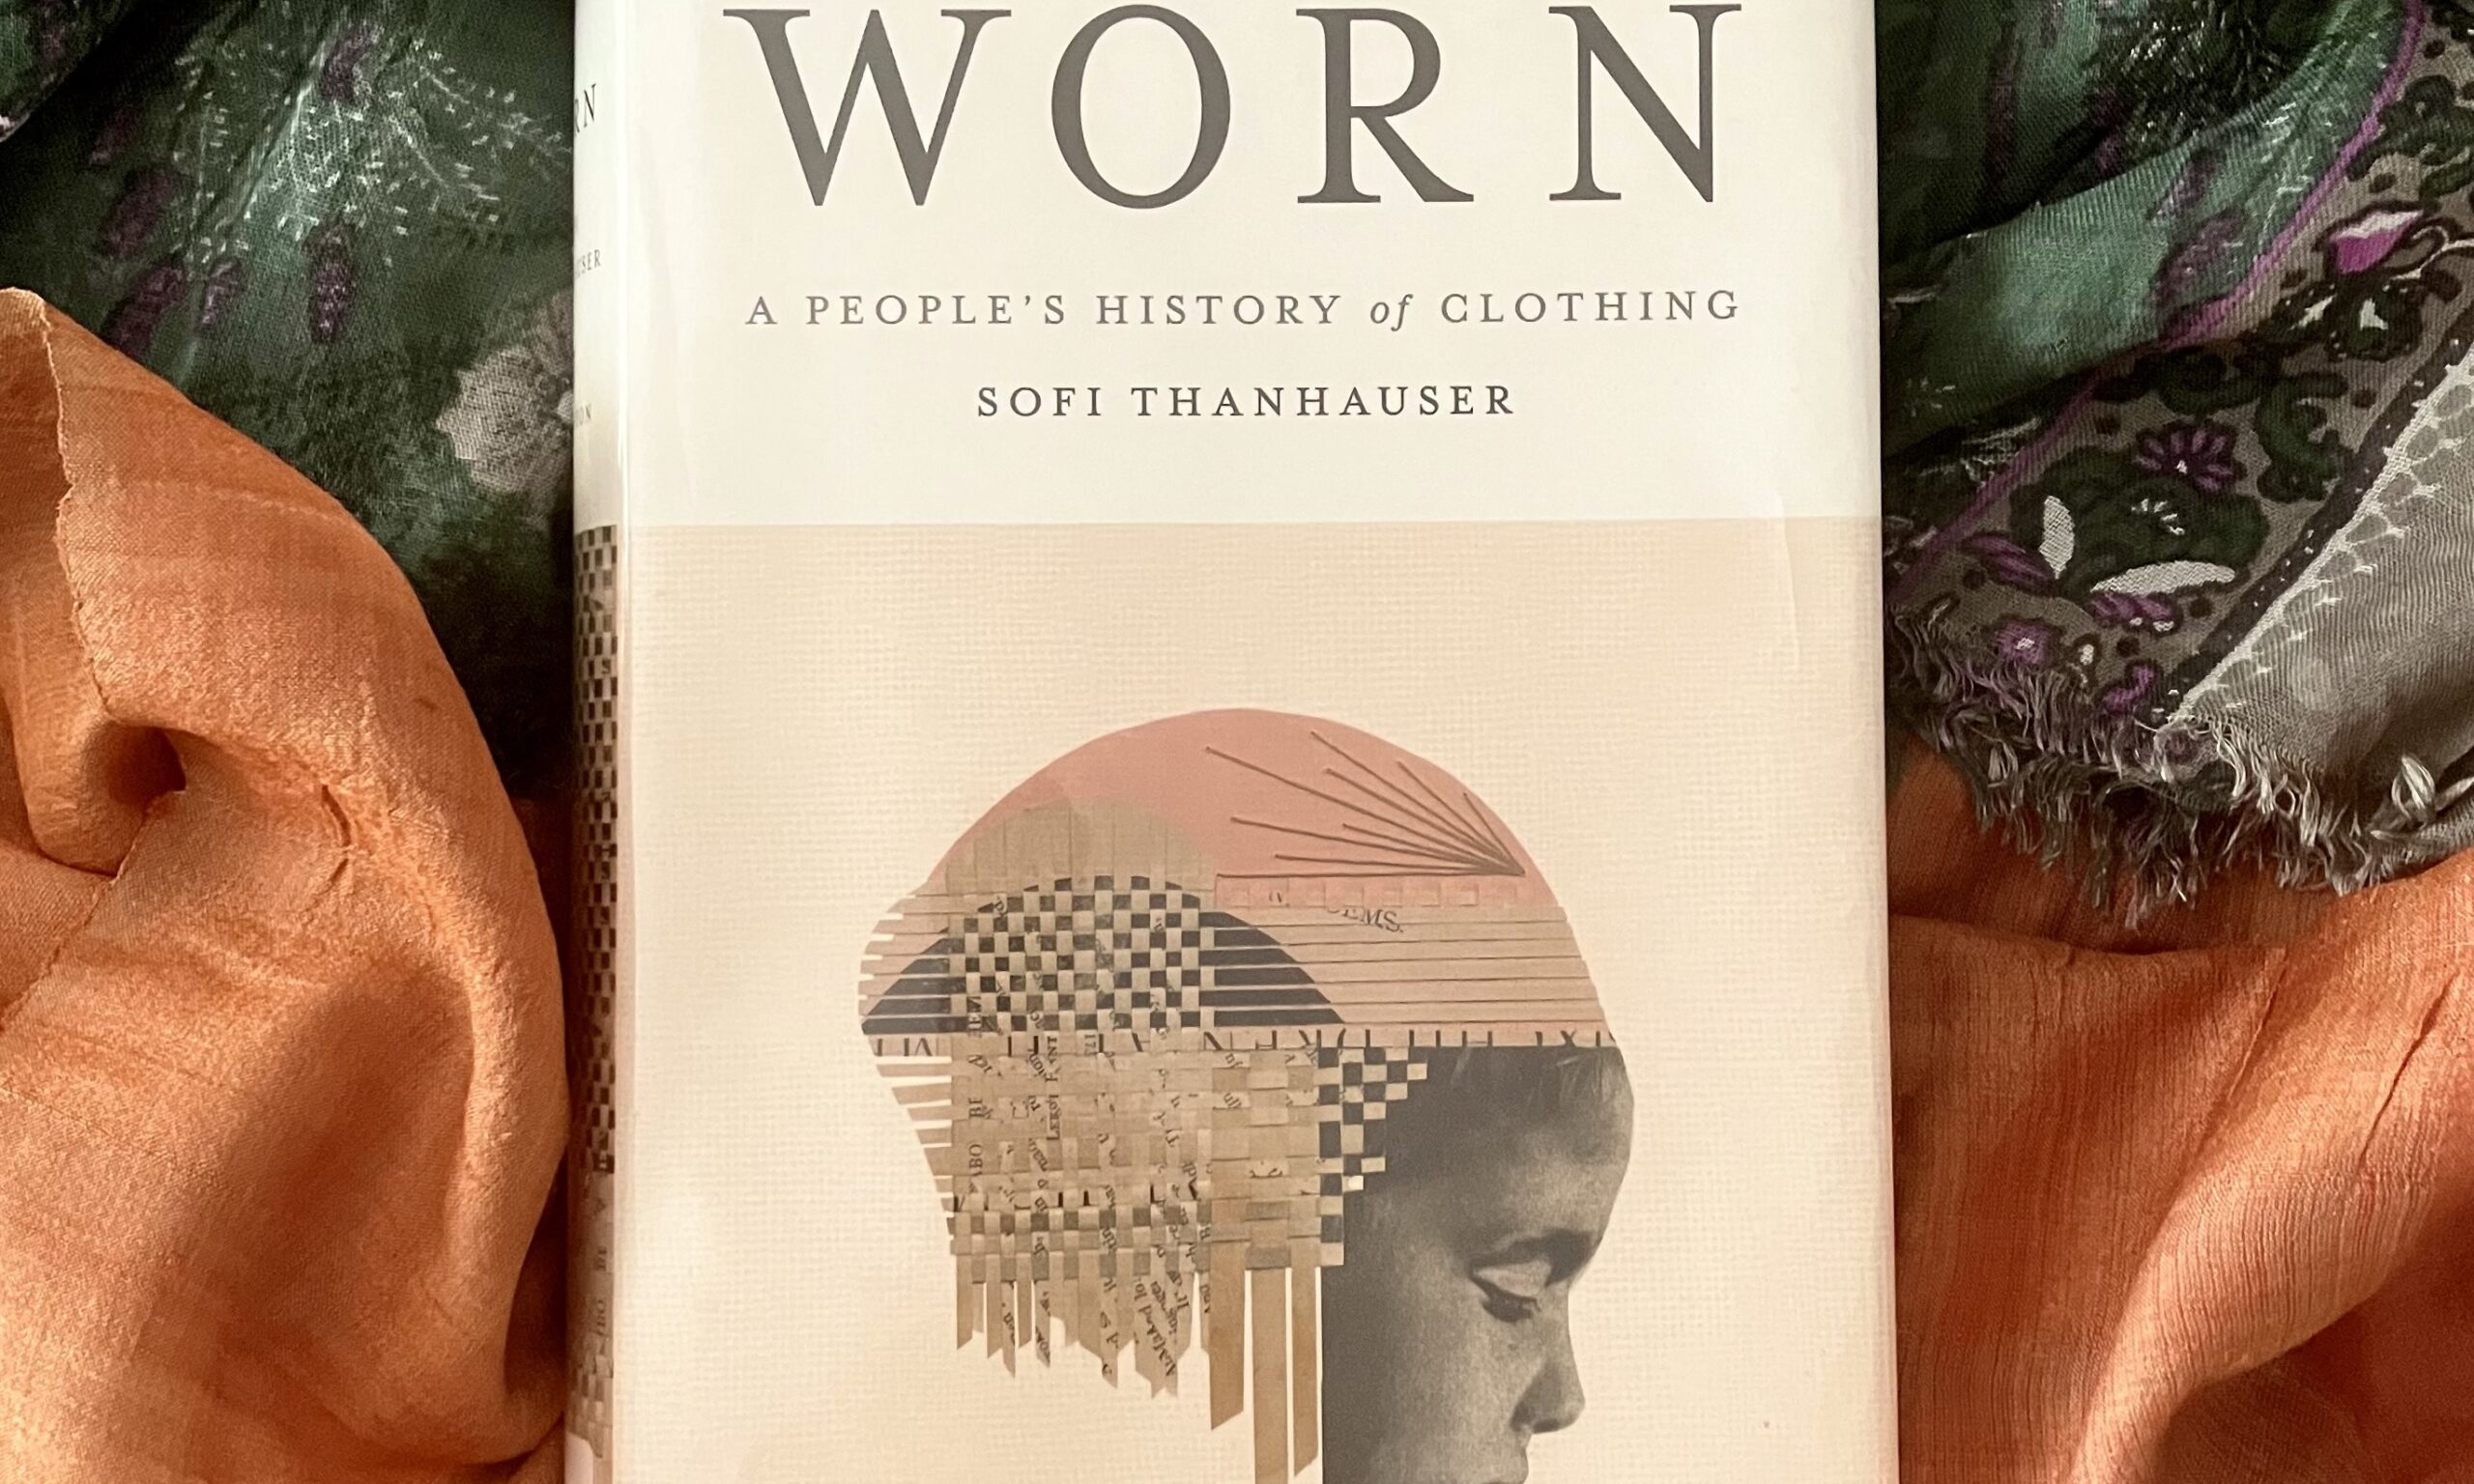 Worn: A People’s History of Clothing by Sofi Thanhauser